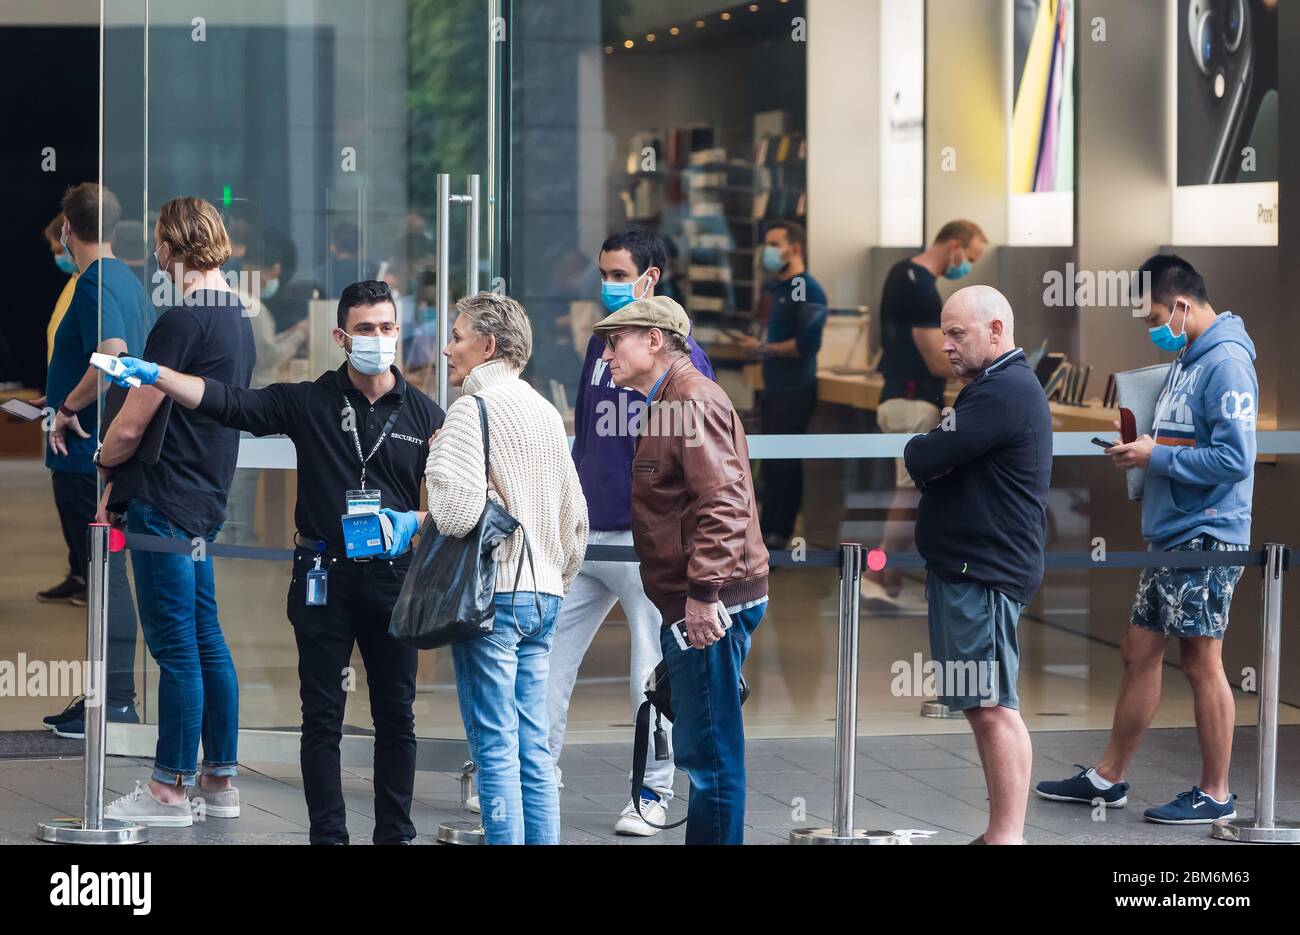 Sydney, Australia. Thursday 7th May 2020. The Apple Store at Bondi Junction in Sydney's eastern suburbs opens as well as all the other Apple stores across Australia as the coronavirus lockdown restrictions ease. Apple has added additional safety procedures including temperature checks and social distancing. Credit Paul Lovelace/Alamy Live News Stock Photo